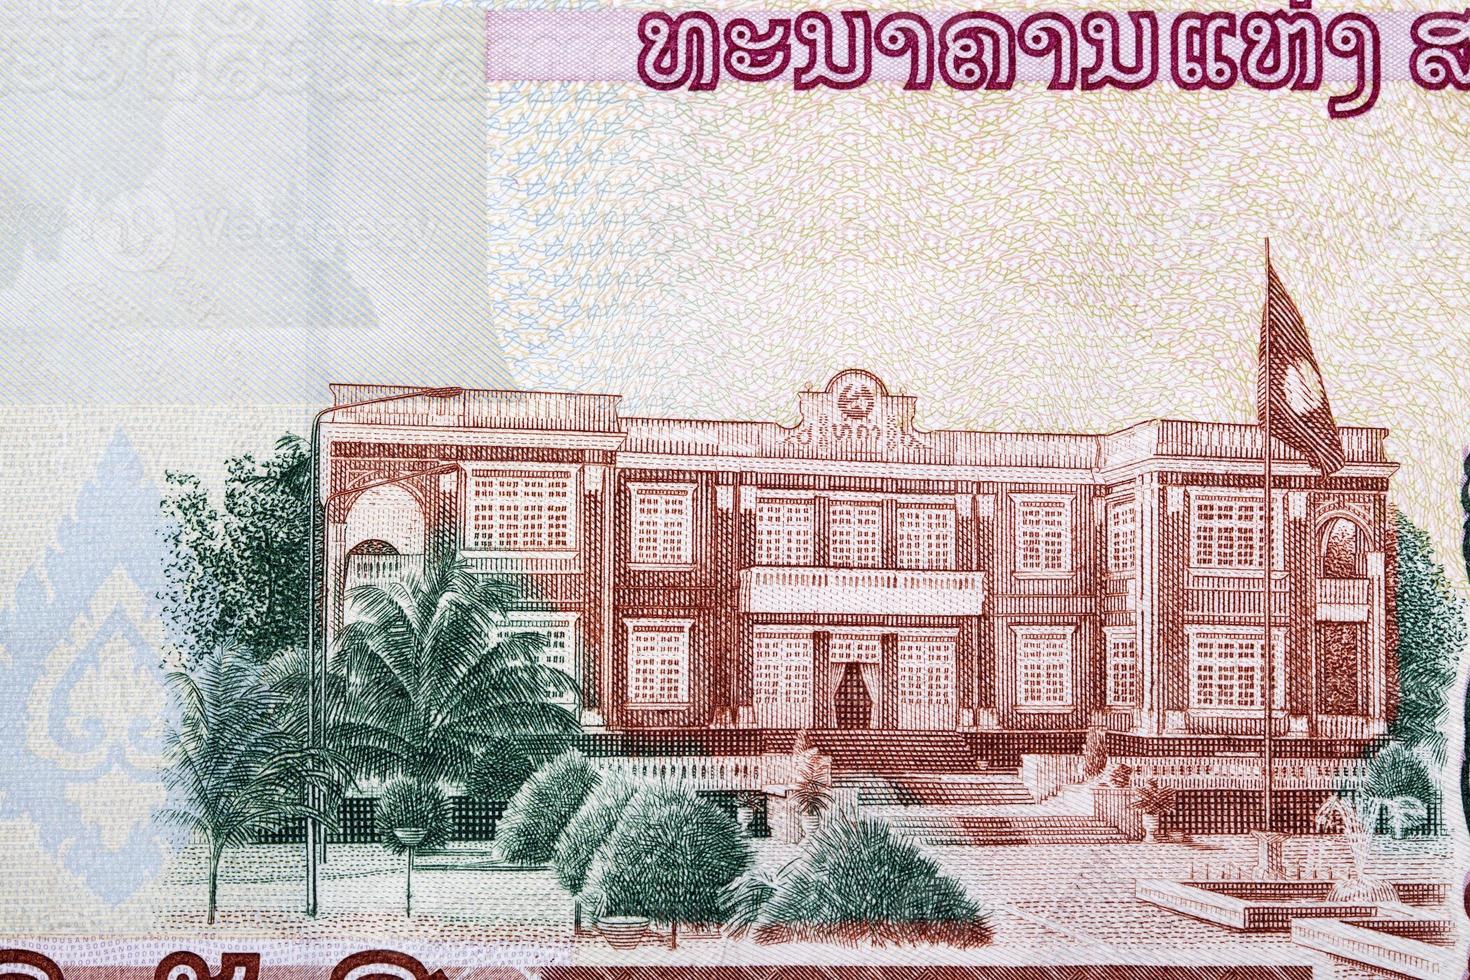 Presidential Palace from Lao money photo